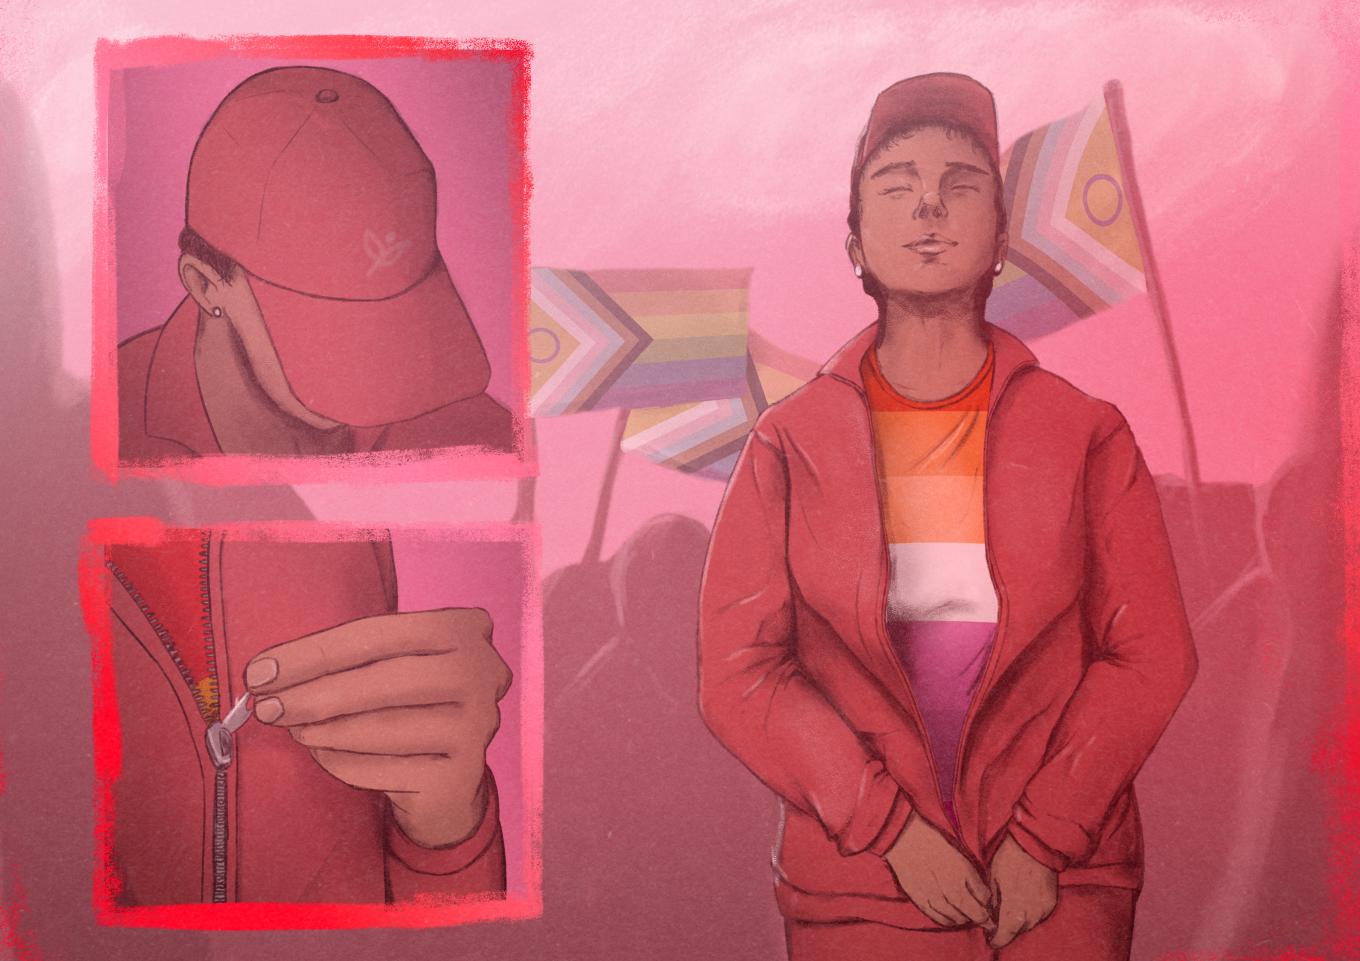 Illustration of a person zipping their jacket to reveal the lesbian flag on their shirt